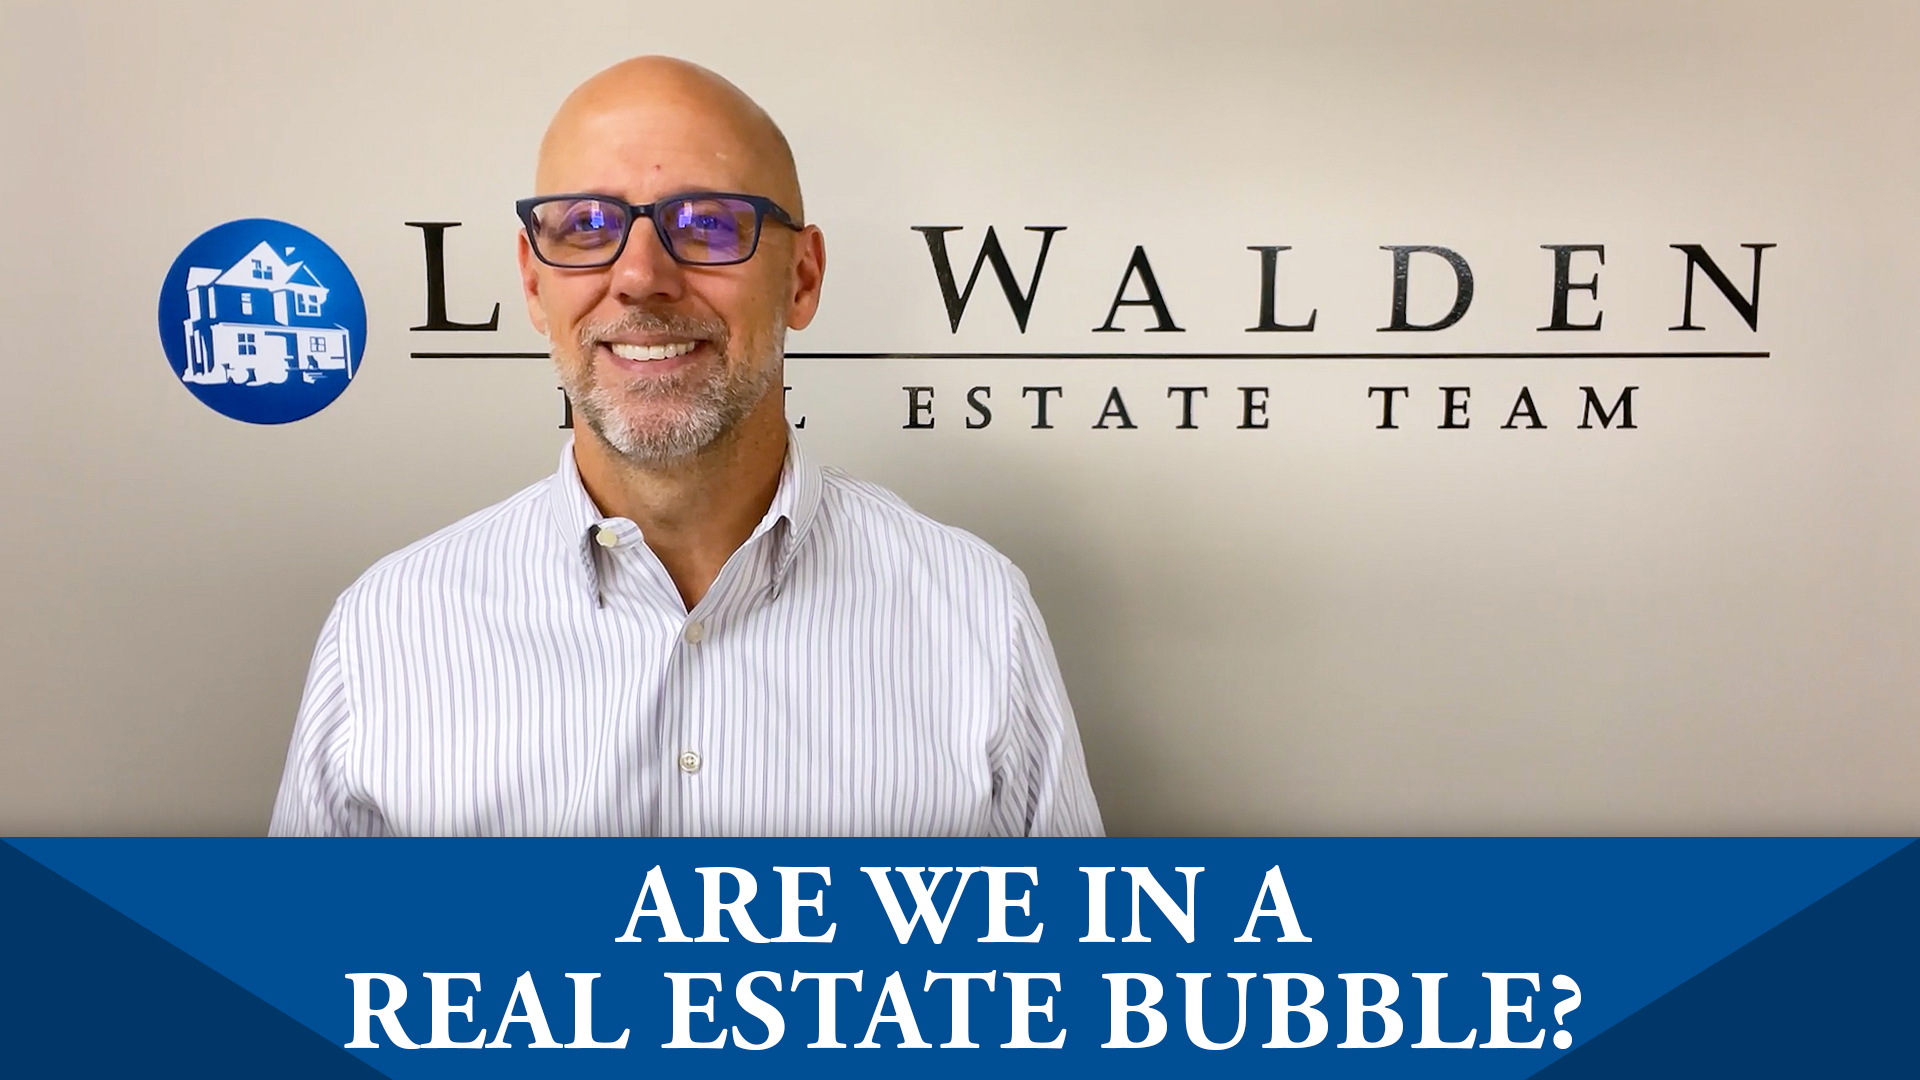 The Truth About the Real Estate “Bubble”